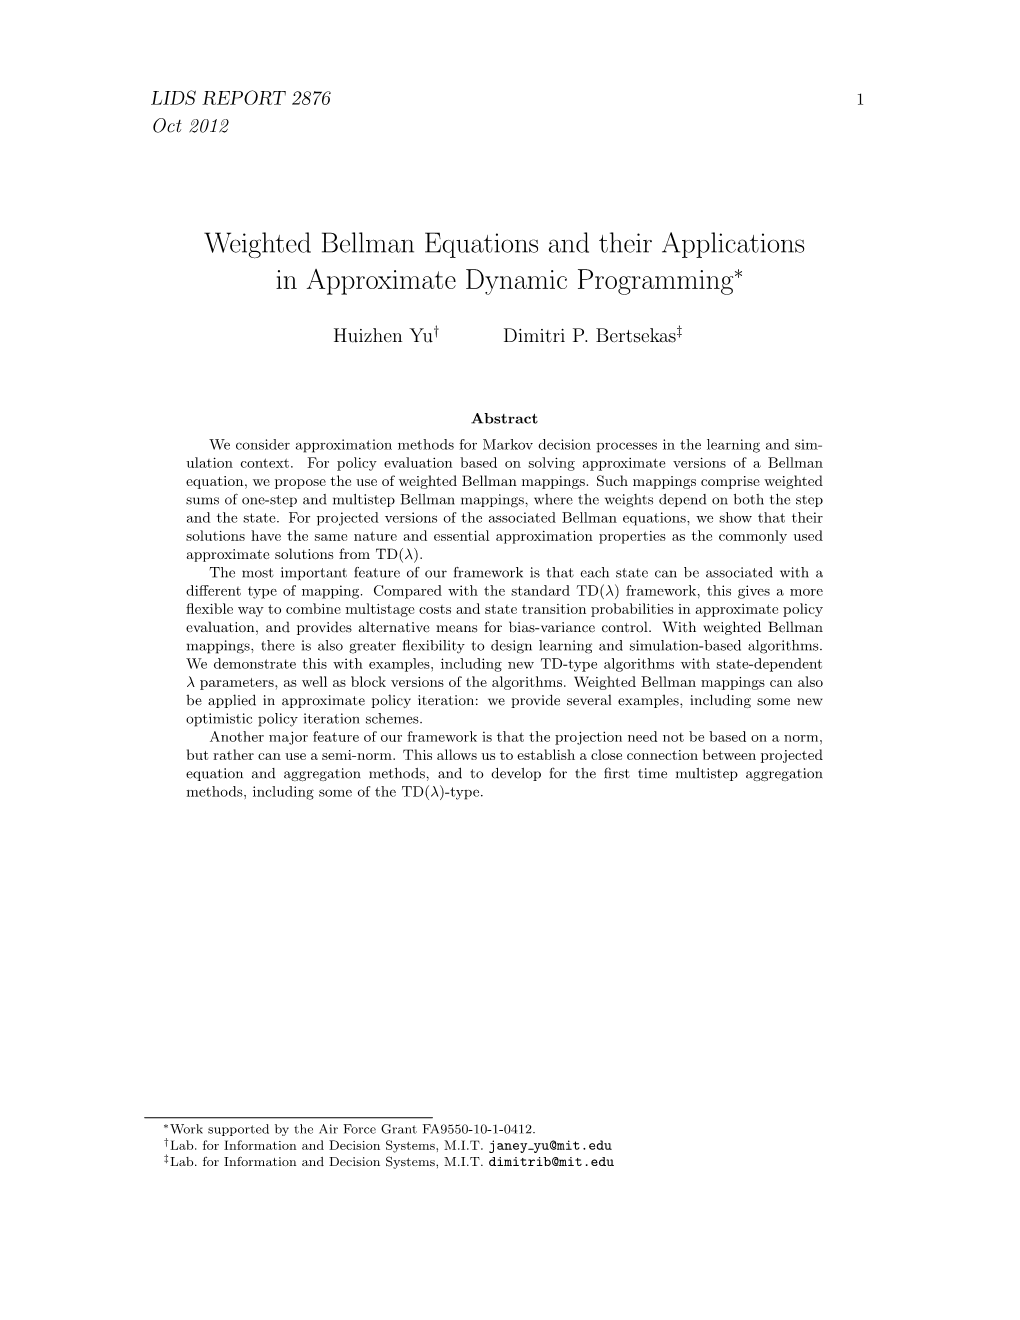 Weighted Bellman Equations and Their Applications in Approximate Dynamic Programming∗